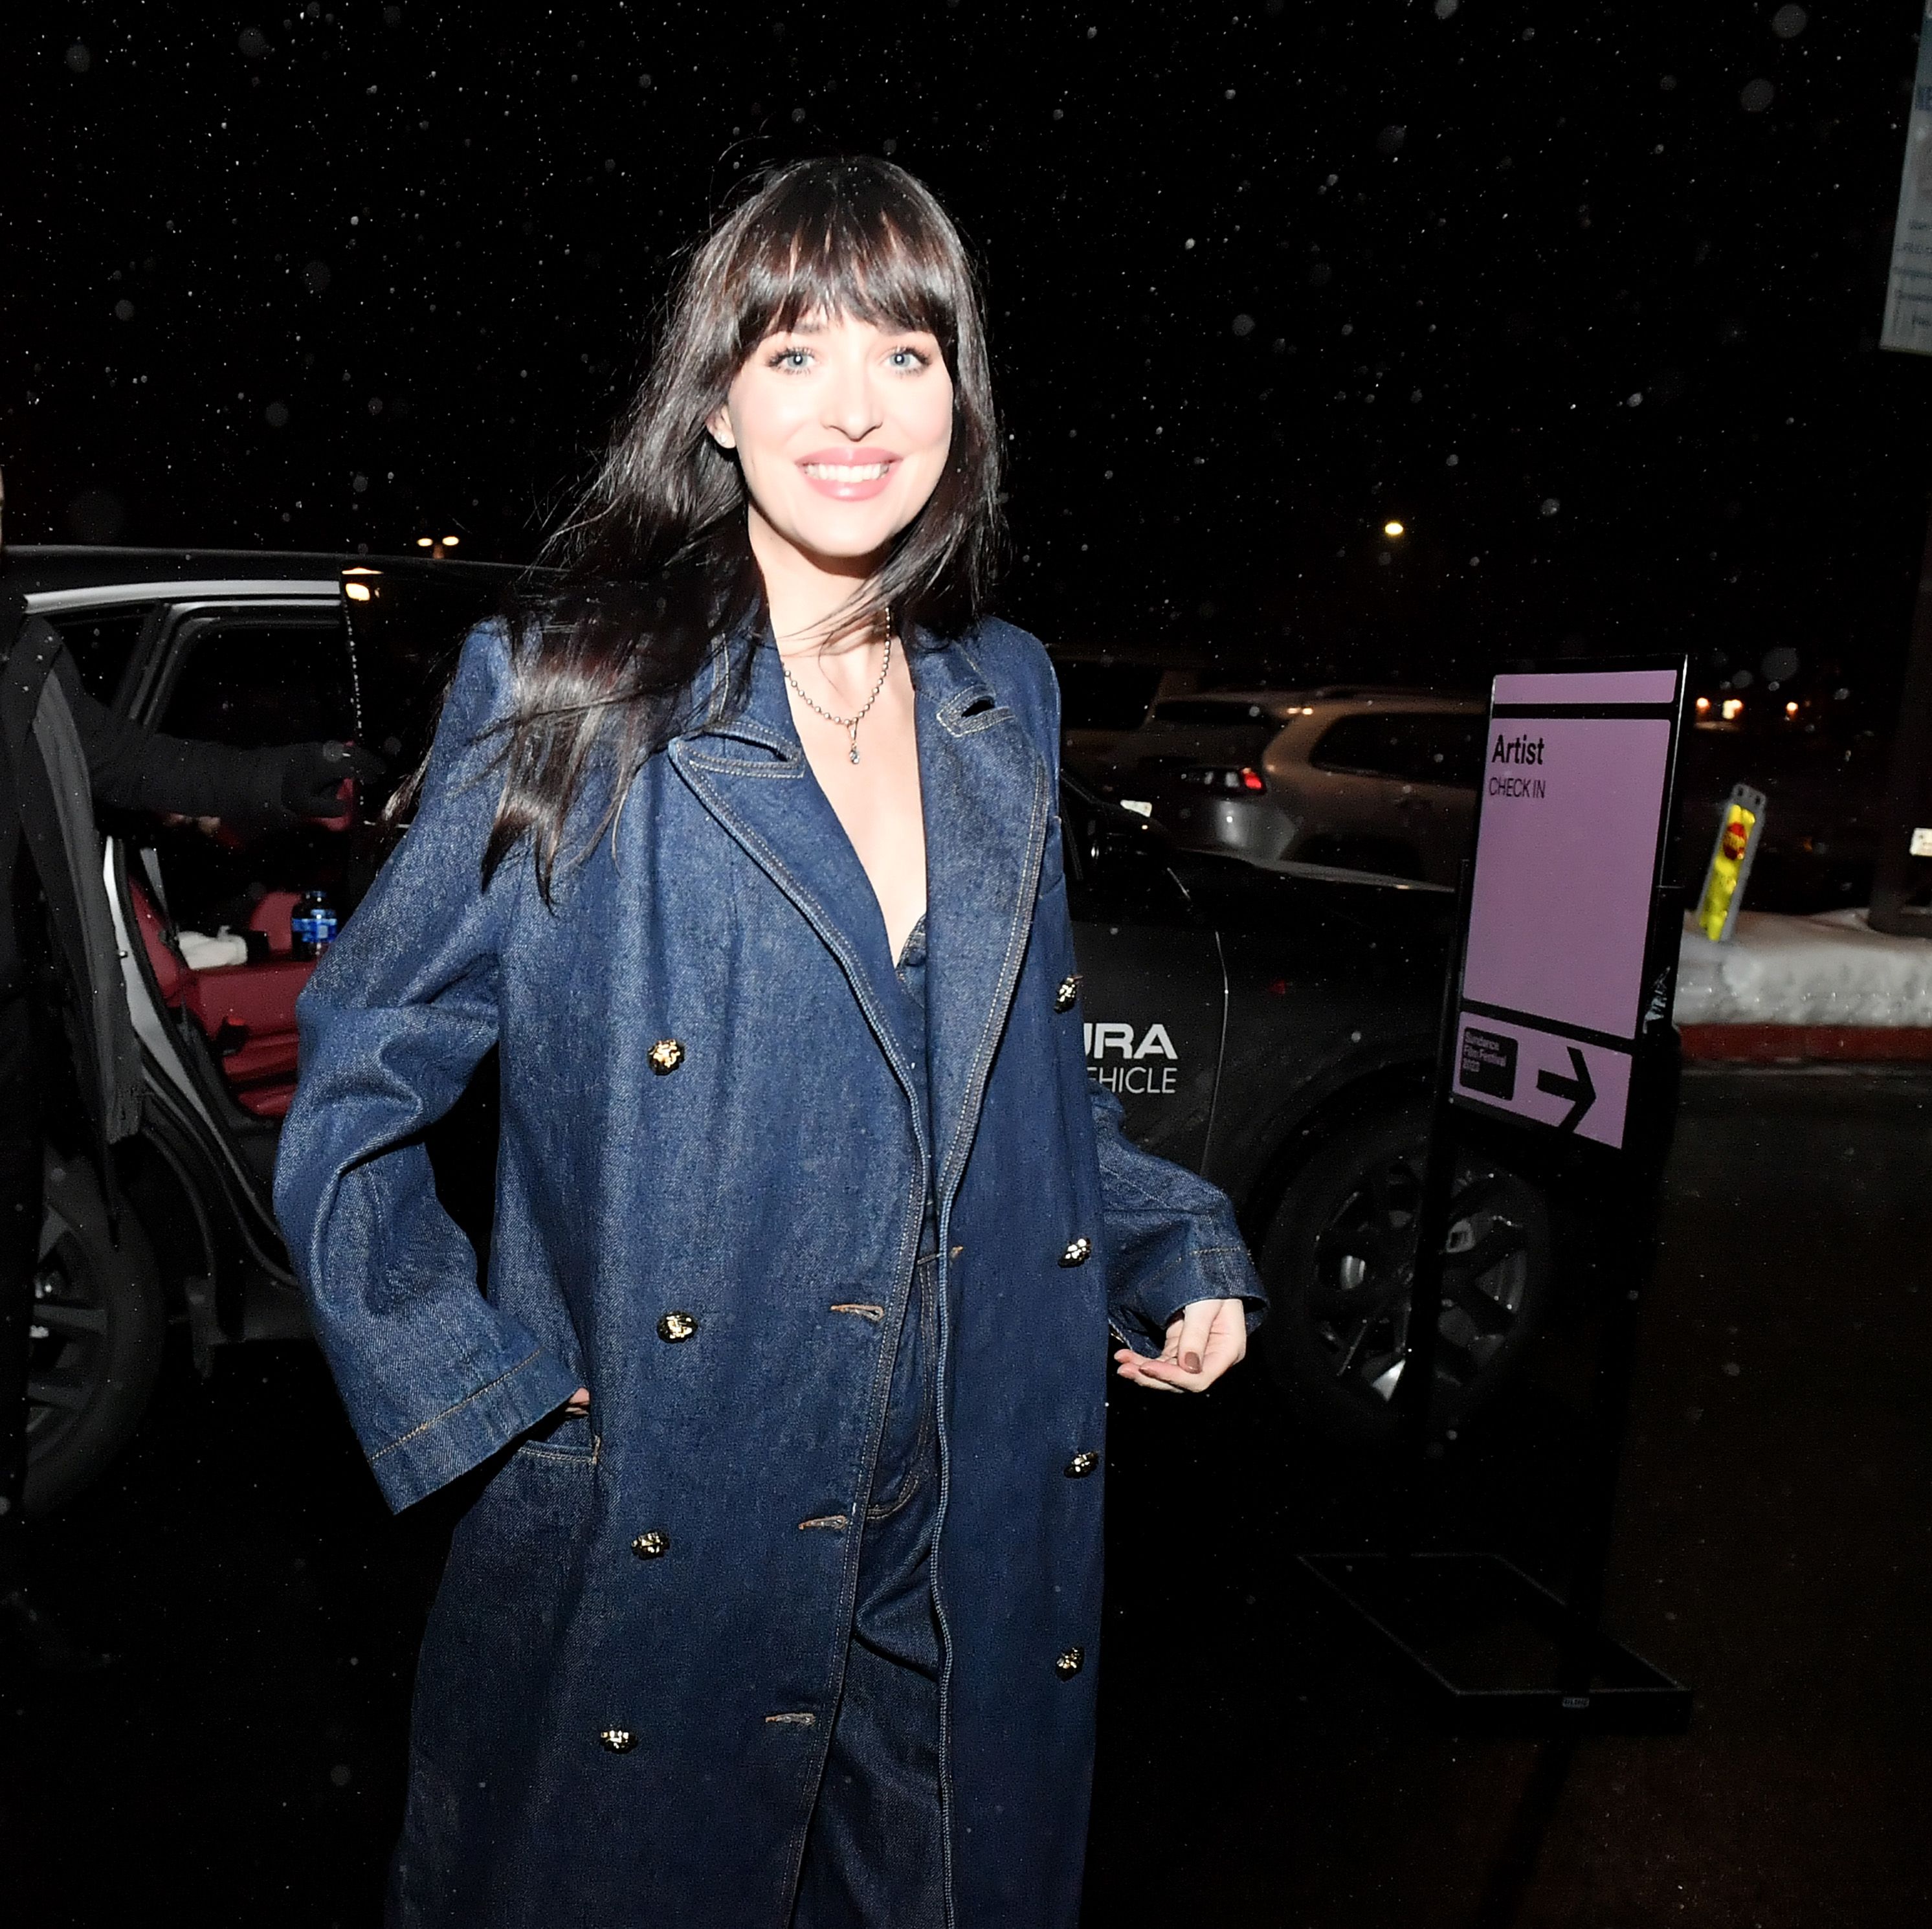 Dakota Johnson Really Went for It With Her Bold Denim Bustier Outfit at Sundance